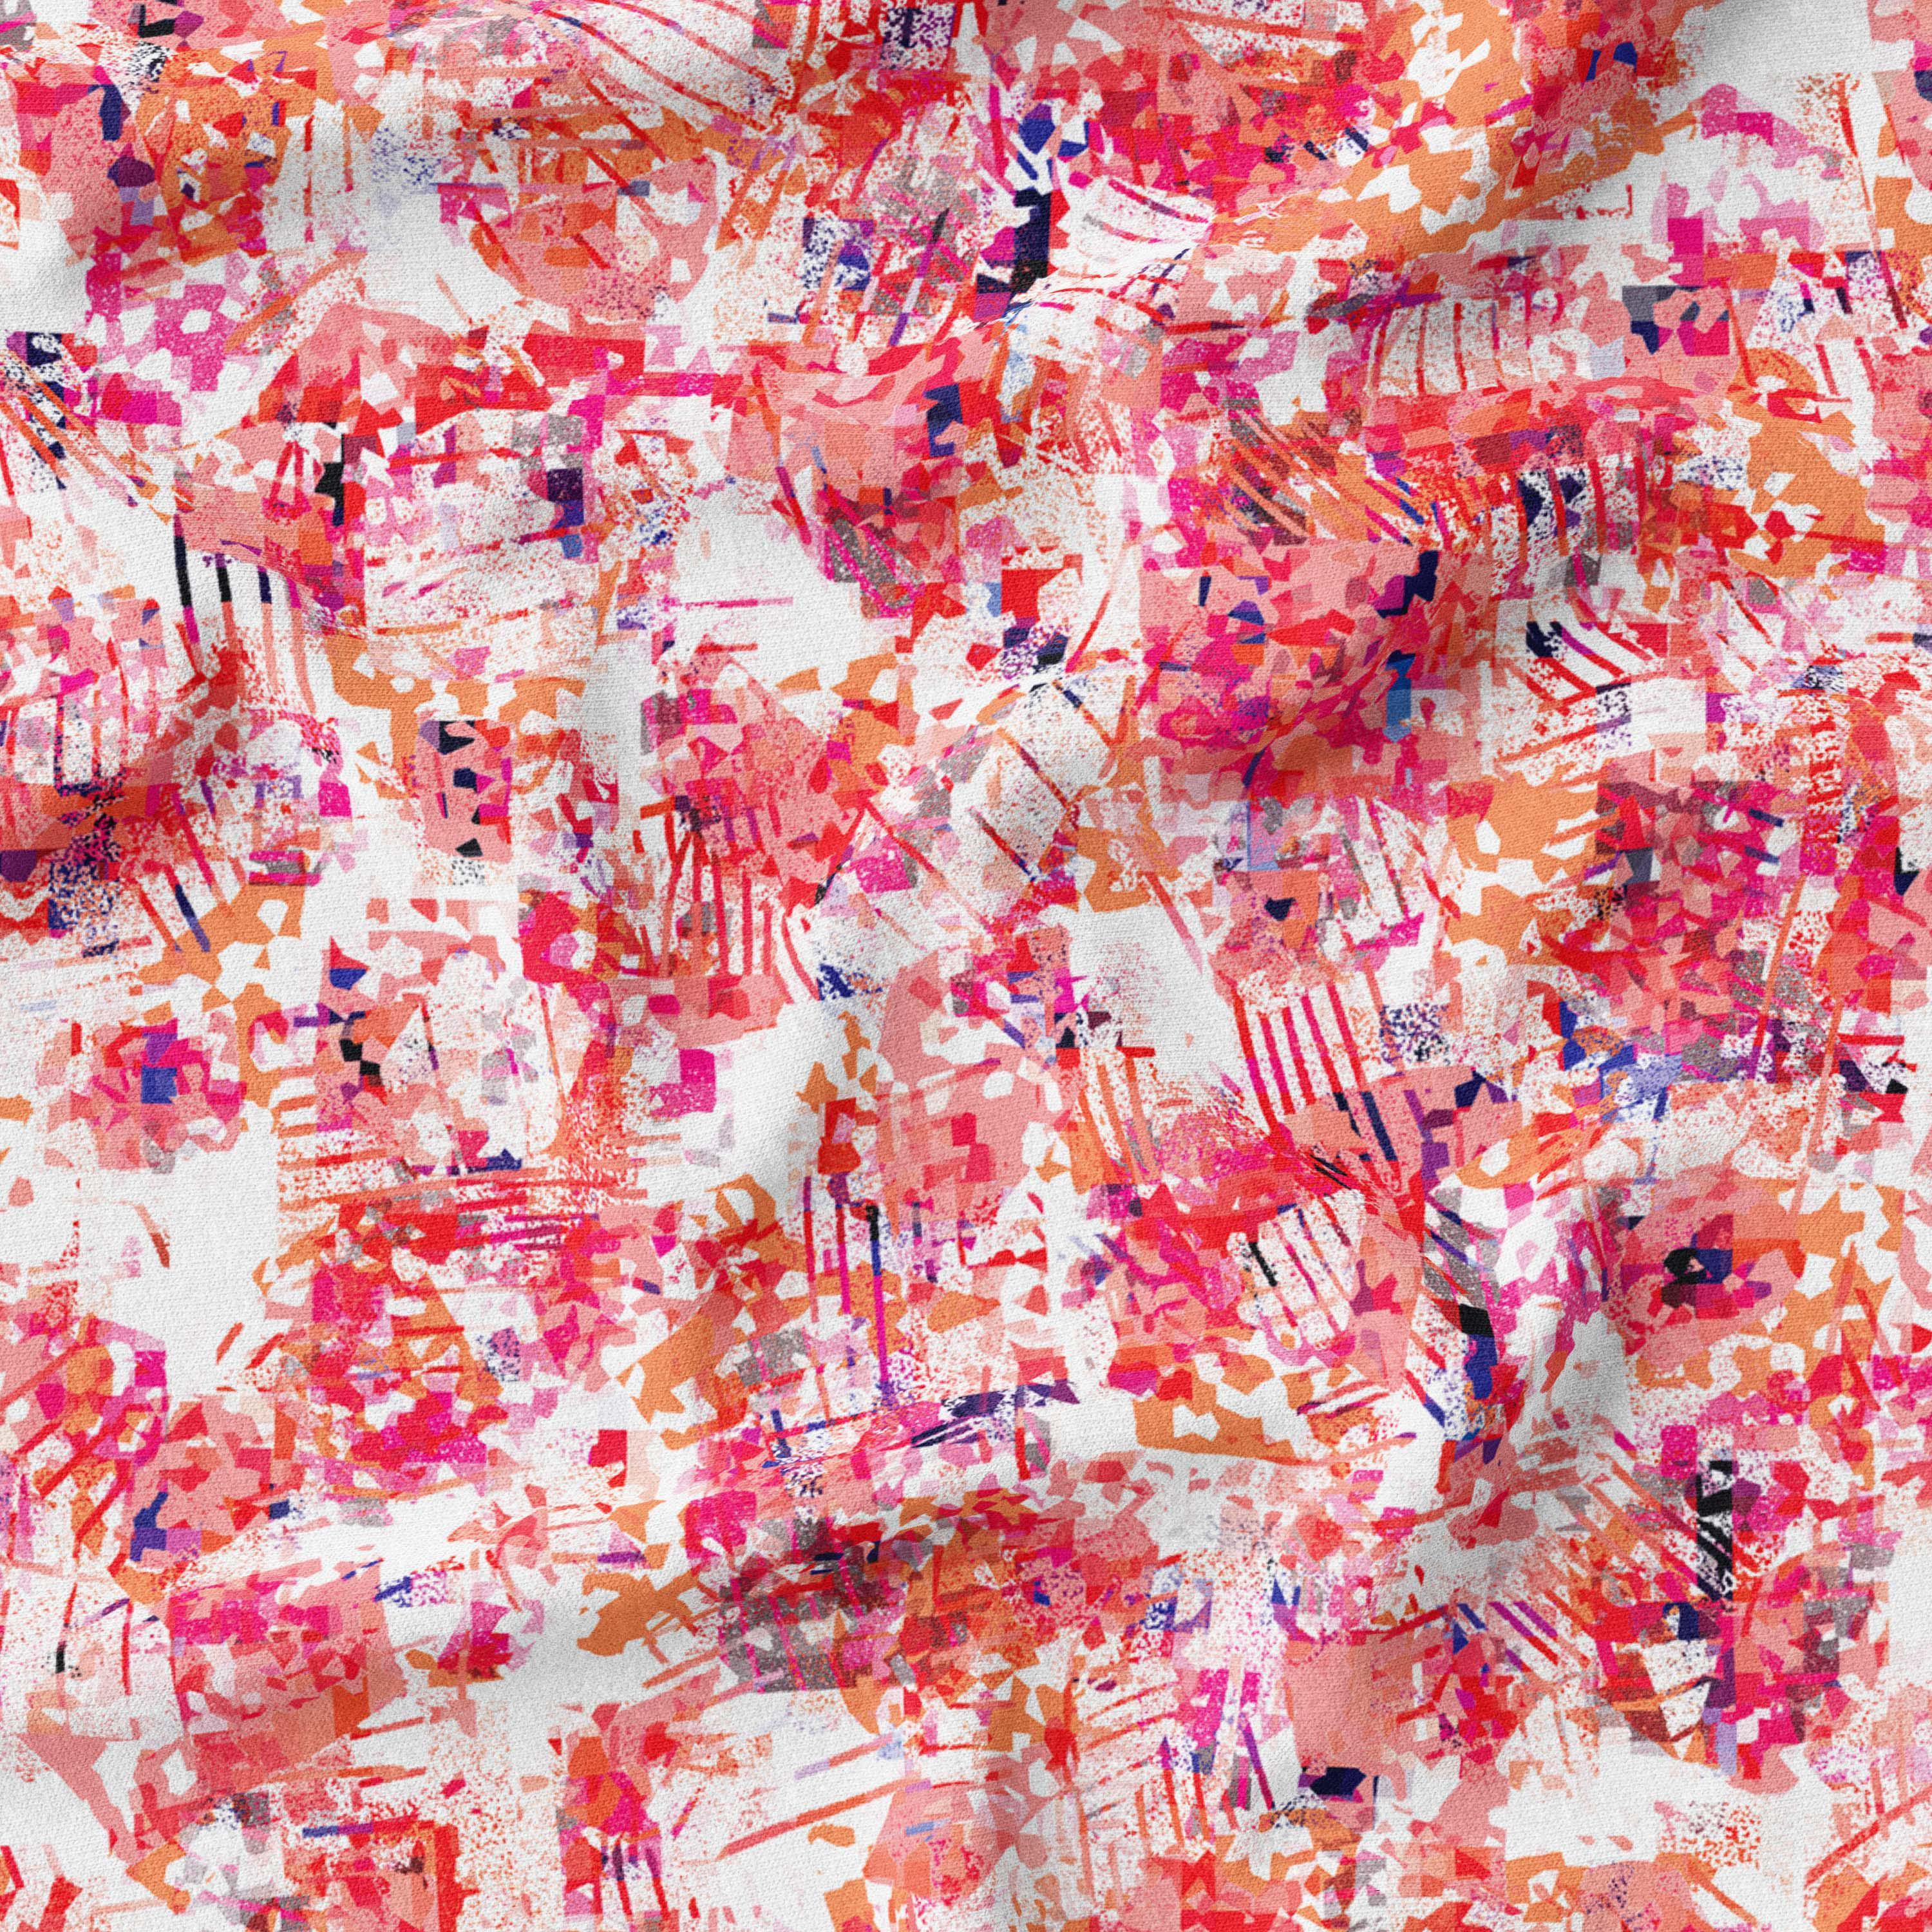 Colorful abstract art fabric featuring a mix of red, pink, and blue splashes on a neutral background, available at Melco Fabrics online store.